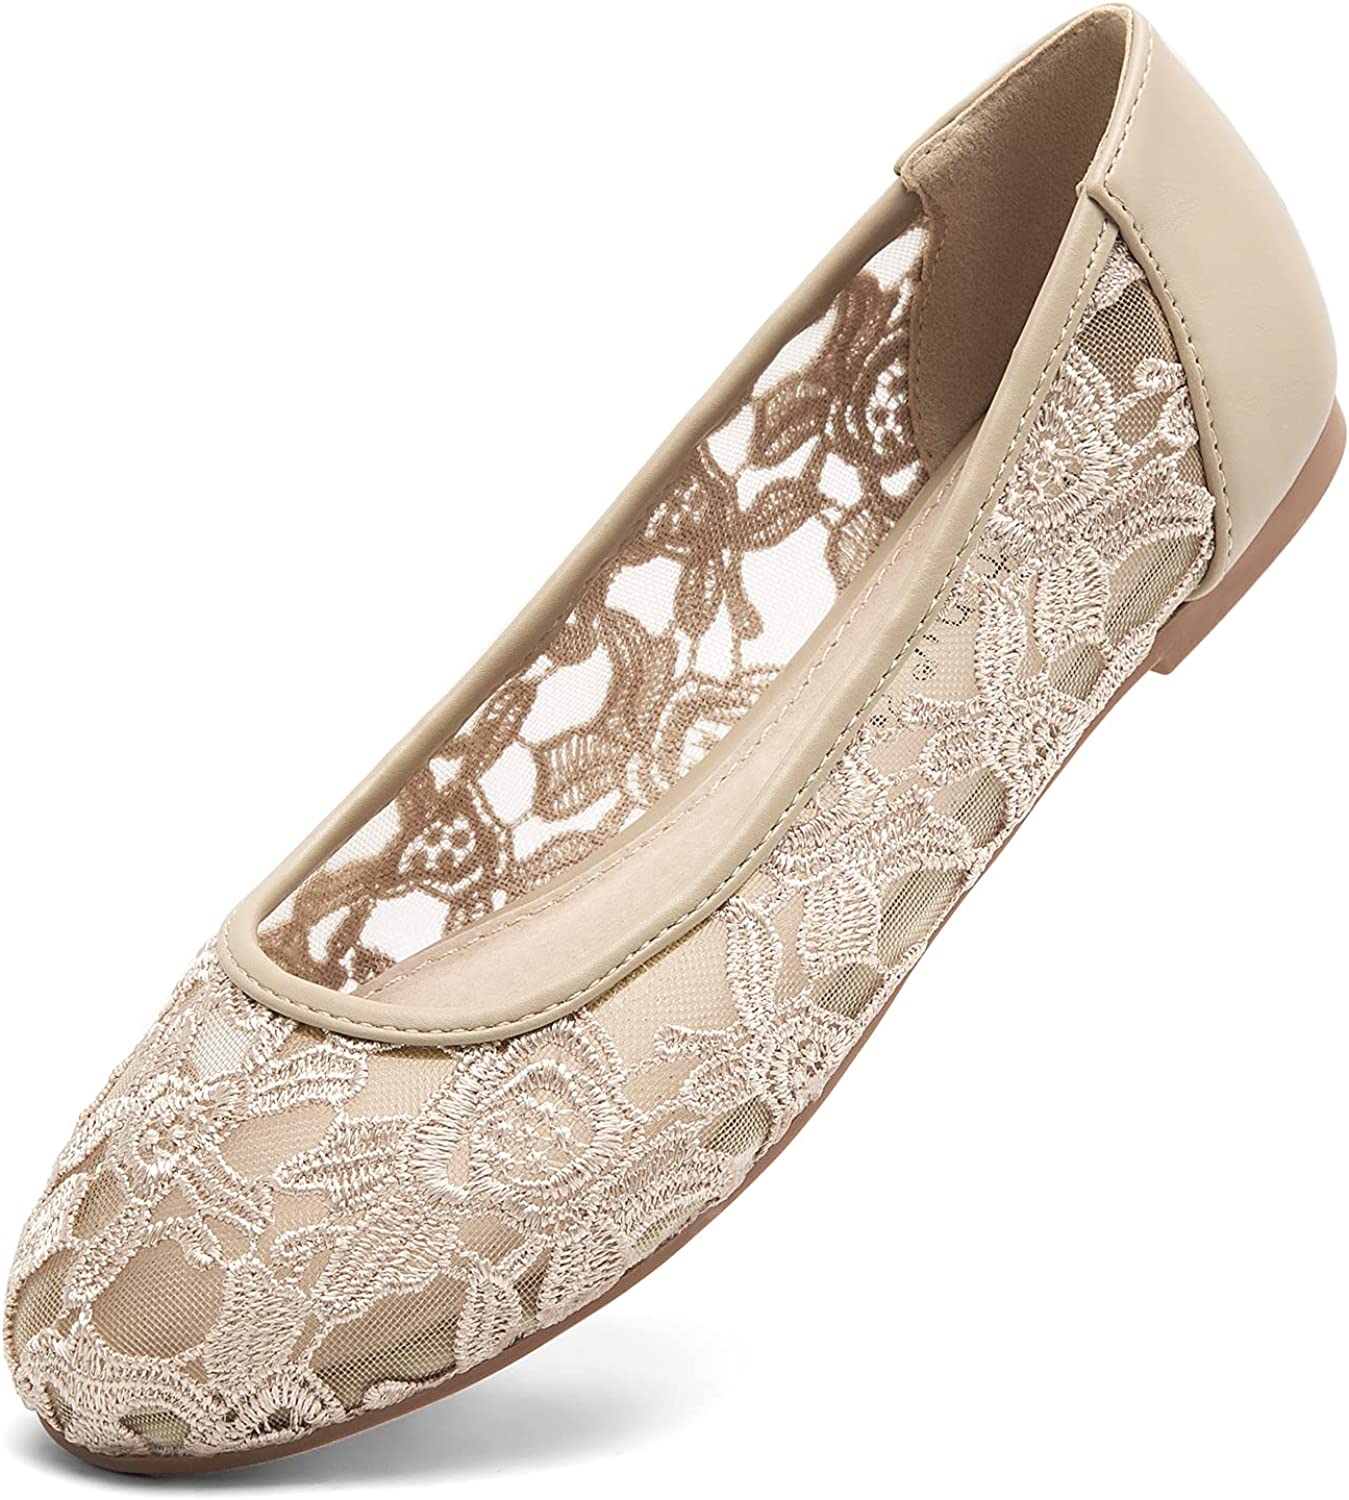 Greatonu Women Shoes Cut Out Slip On Synthetic Lace Ballet Flats 